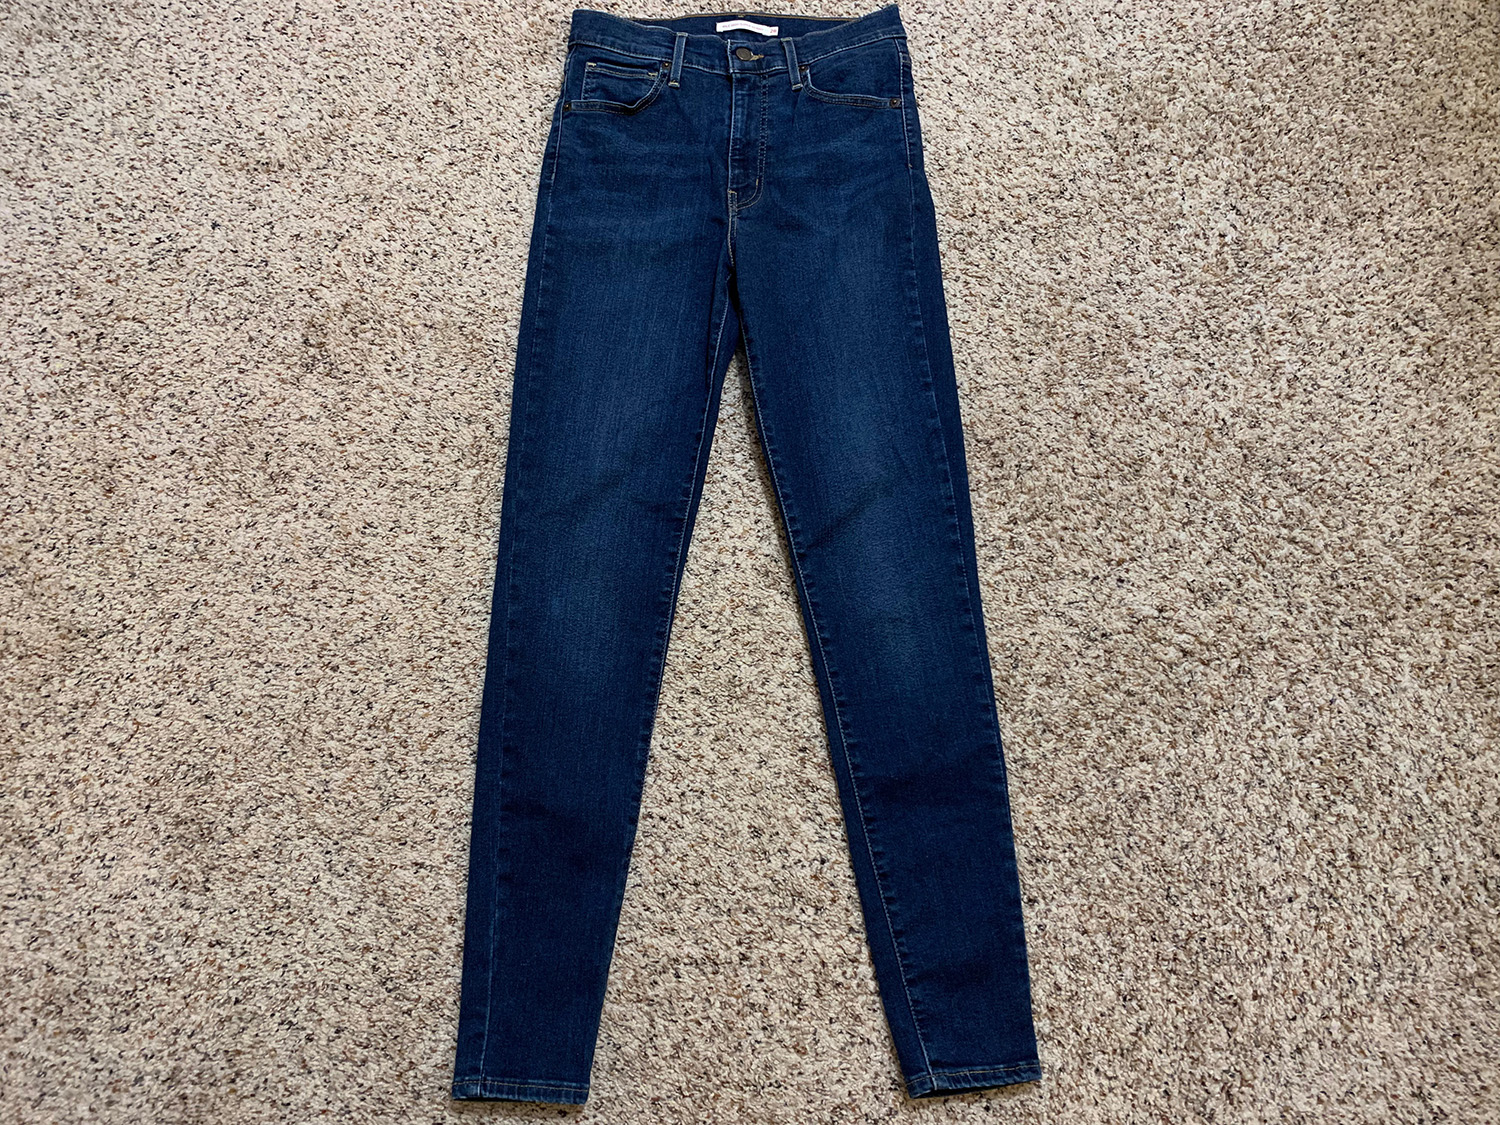 Levis Womens Mile High Super Skinny Jeans Size 28 at The MenuGem Web Store